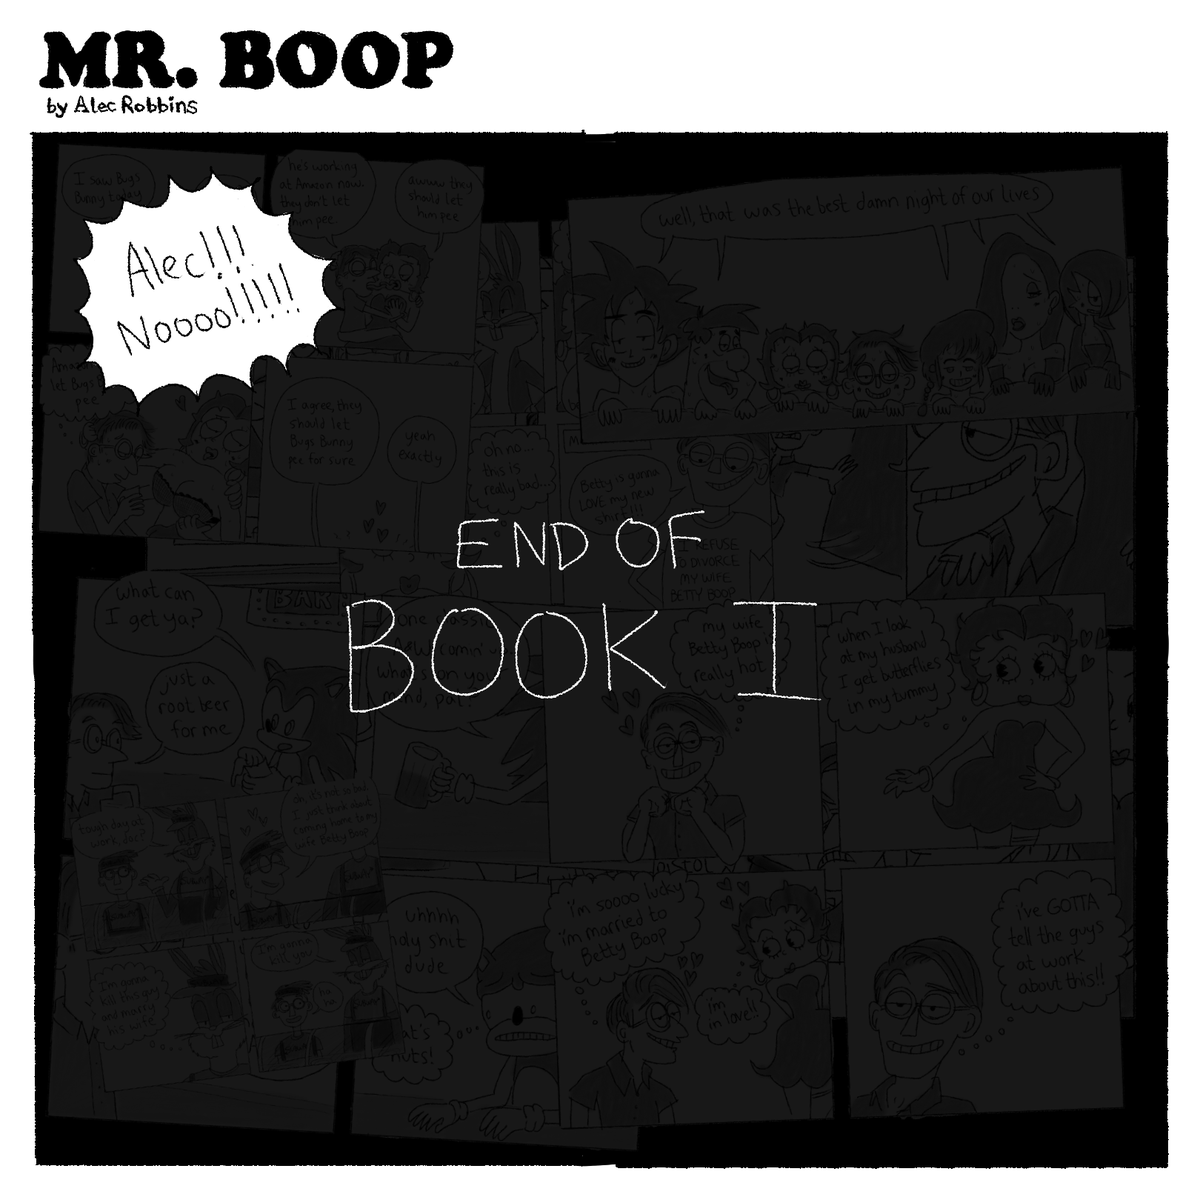 E N D  OF  B O O P  I(don't worry, mr. boop will continue onward uninterrupted tomorrow morning with more daily comics as usual... please stay tuned for an exciting Book Preorder Announcement...)